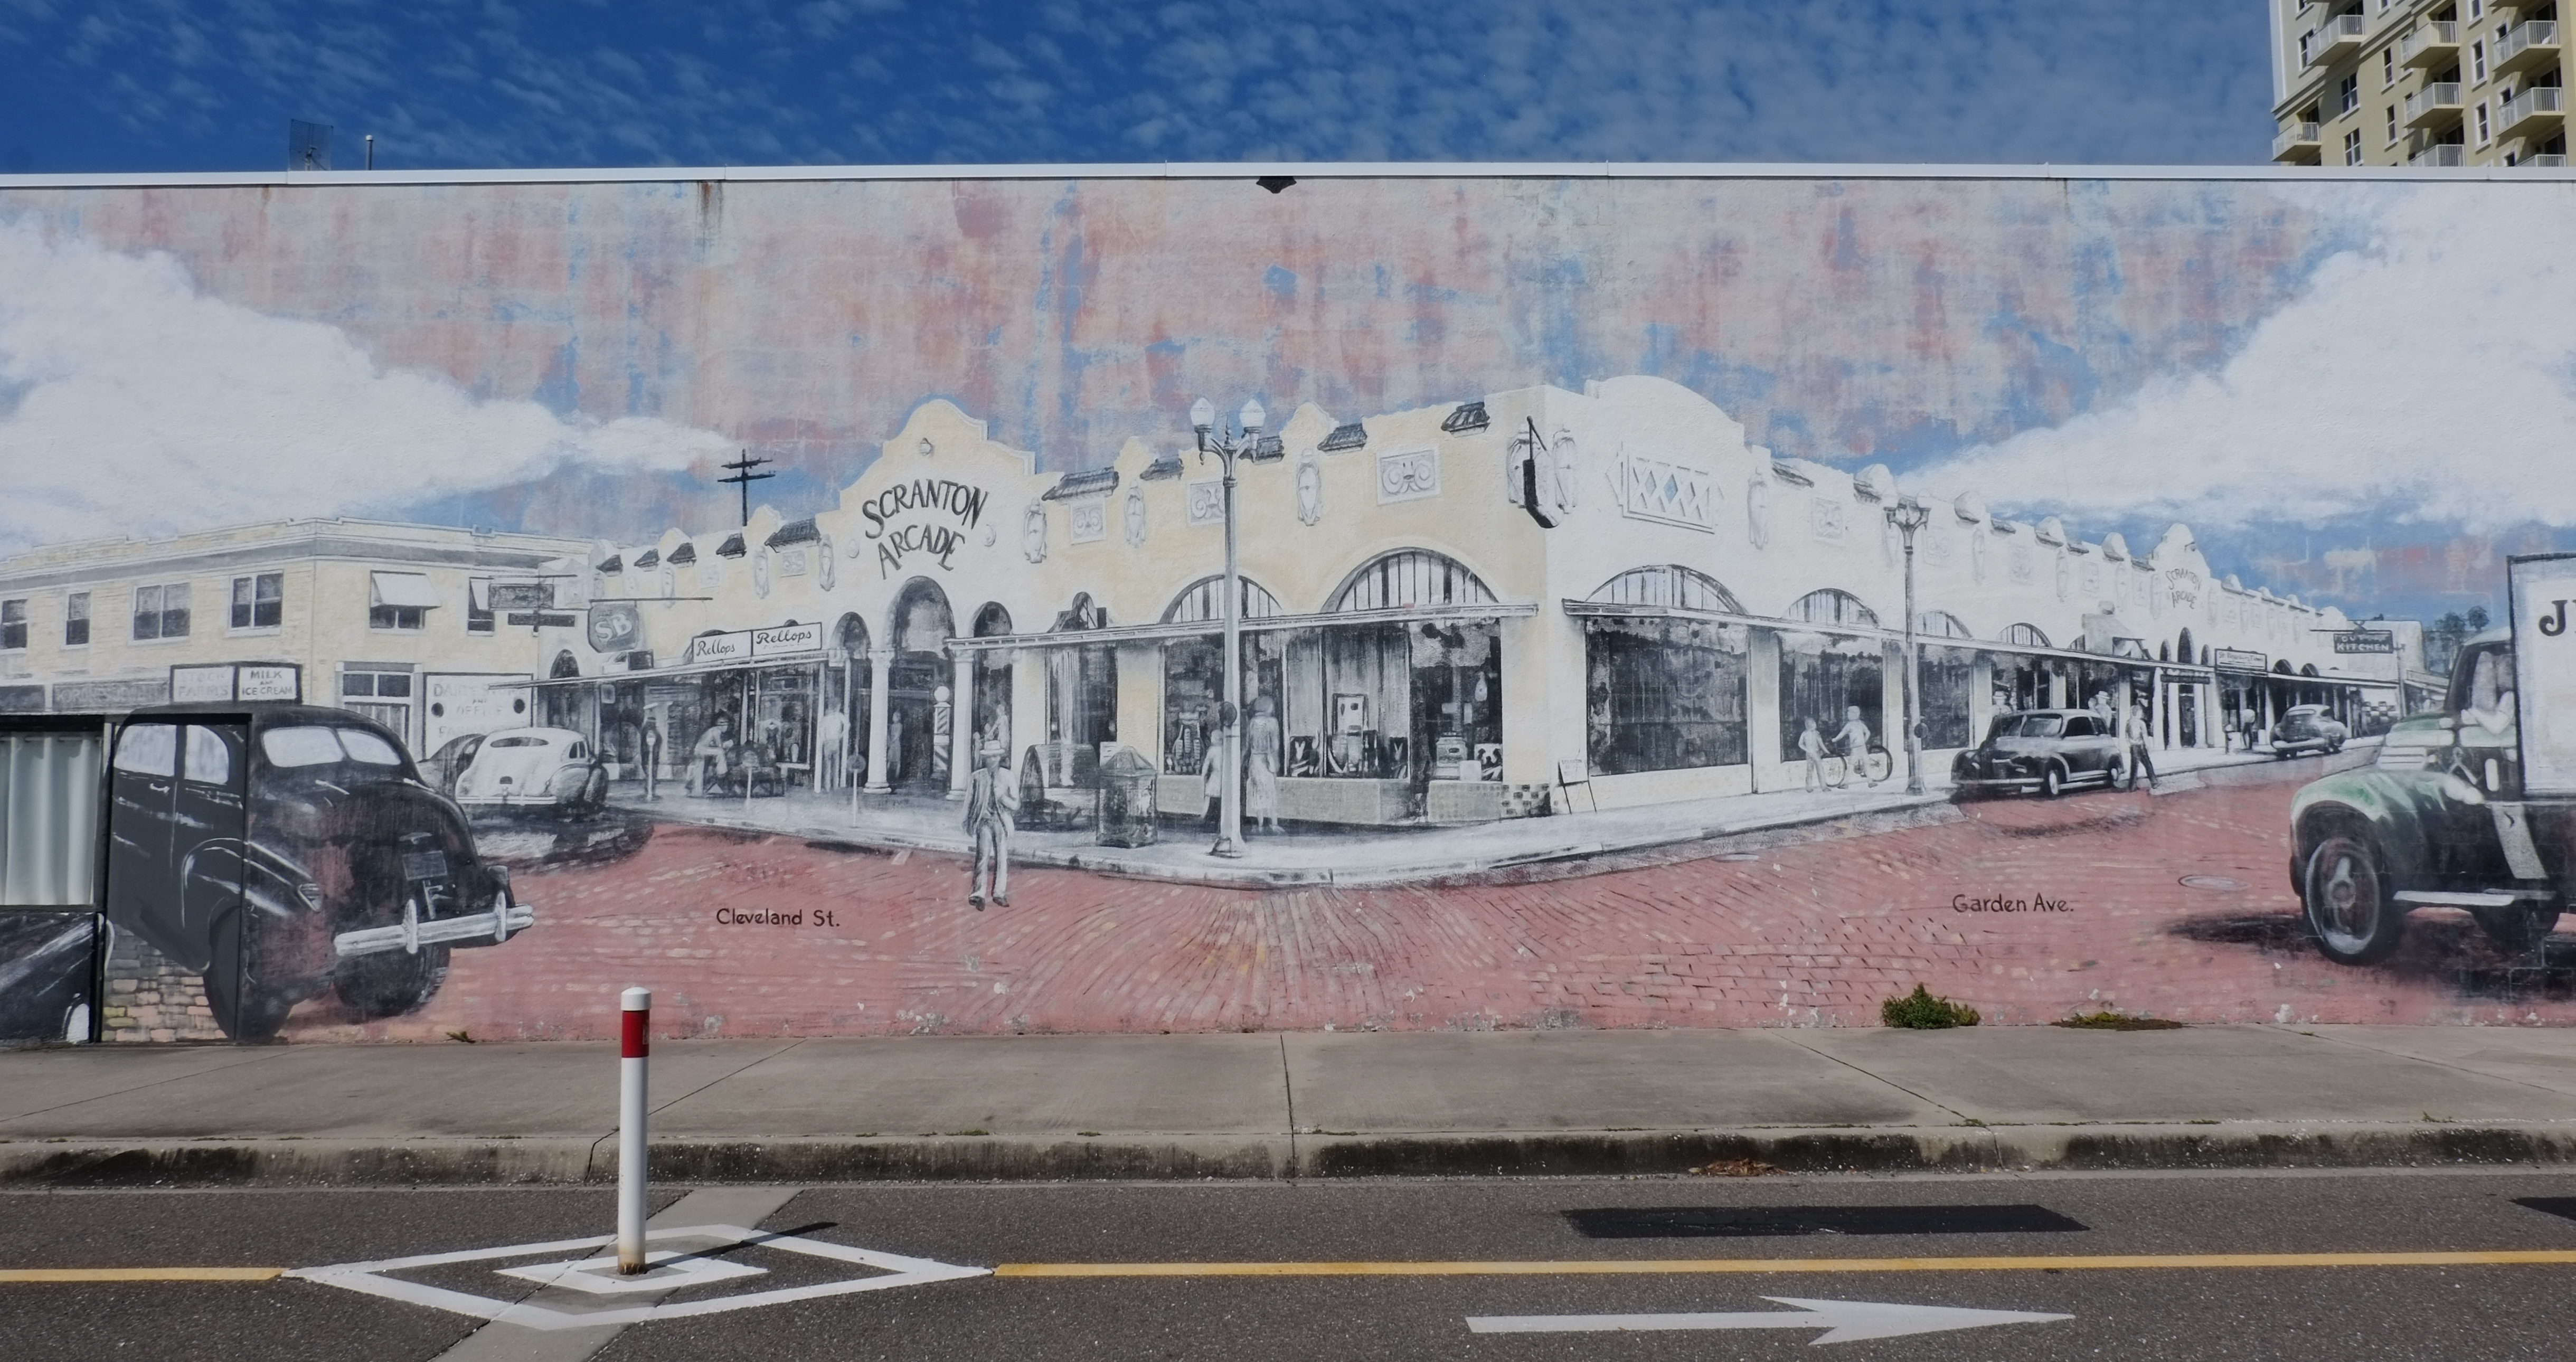 mural that looks like an old photograph of the intersection of Garden Ave and Cleveland St in Clearwater, old cars and trucks, Scranton Arcade, stores, restaurant, downtown